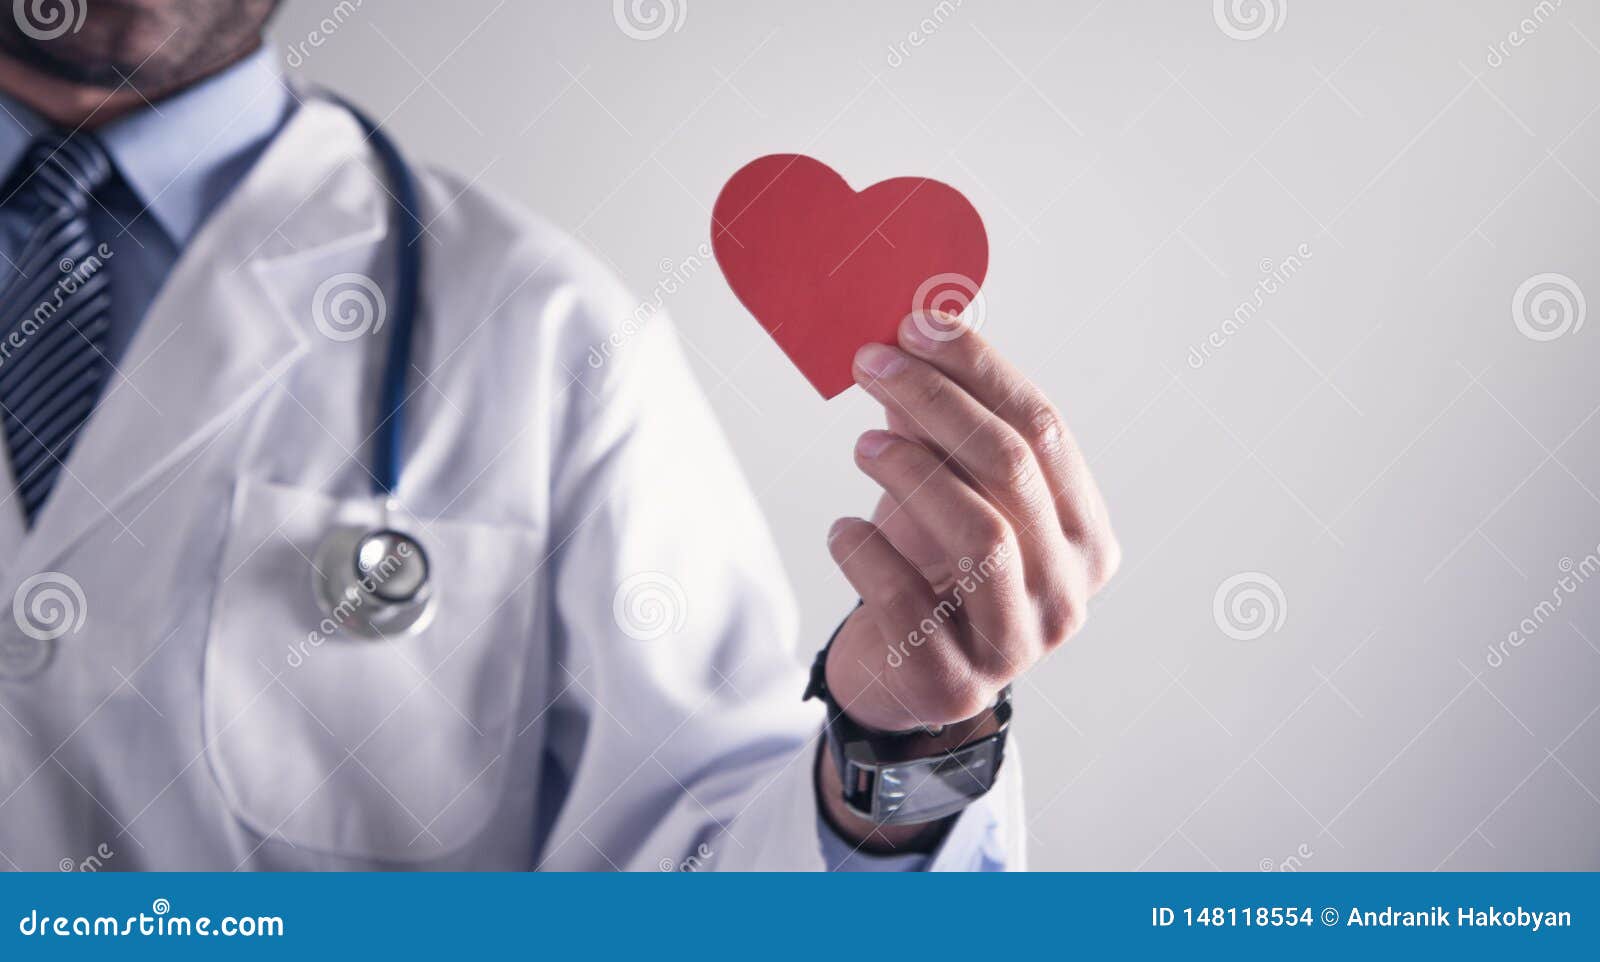 doctor holding red paper heart. healthcare and cardiology concept